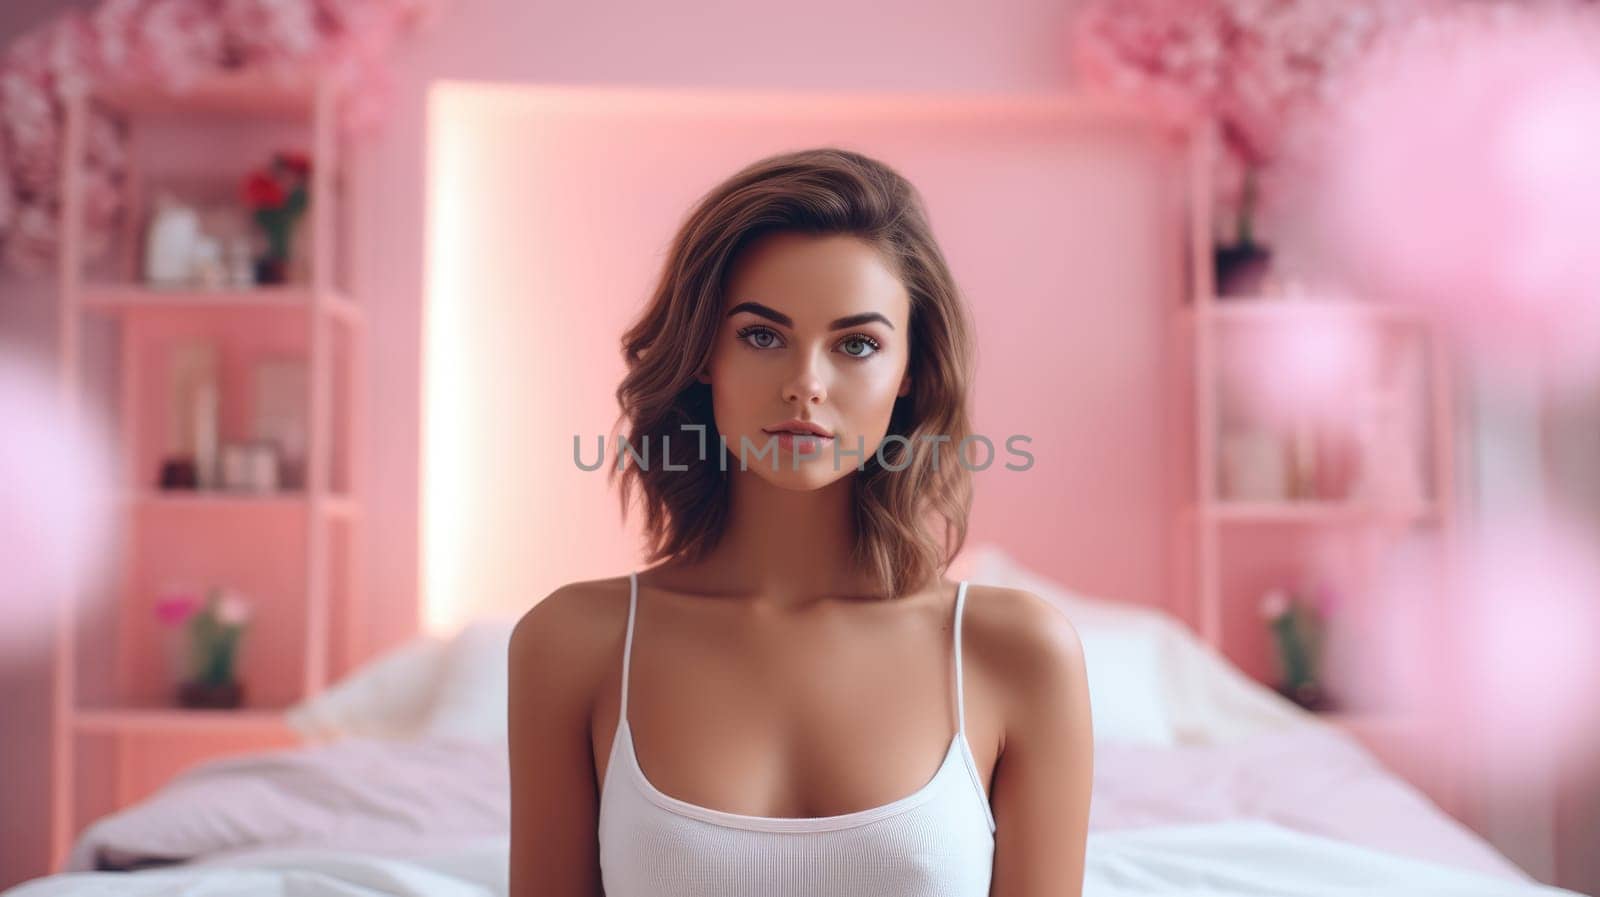 Beautiful woman portrait, blurred pink room as background. AI